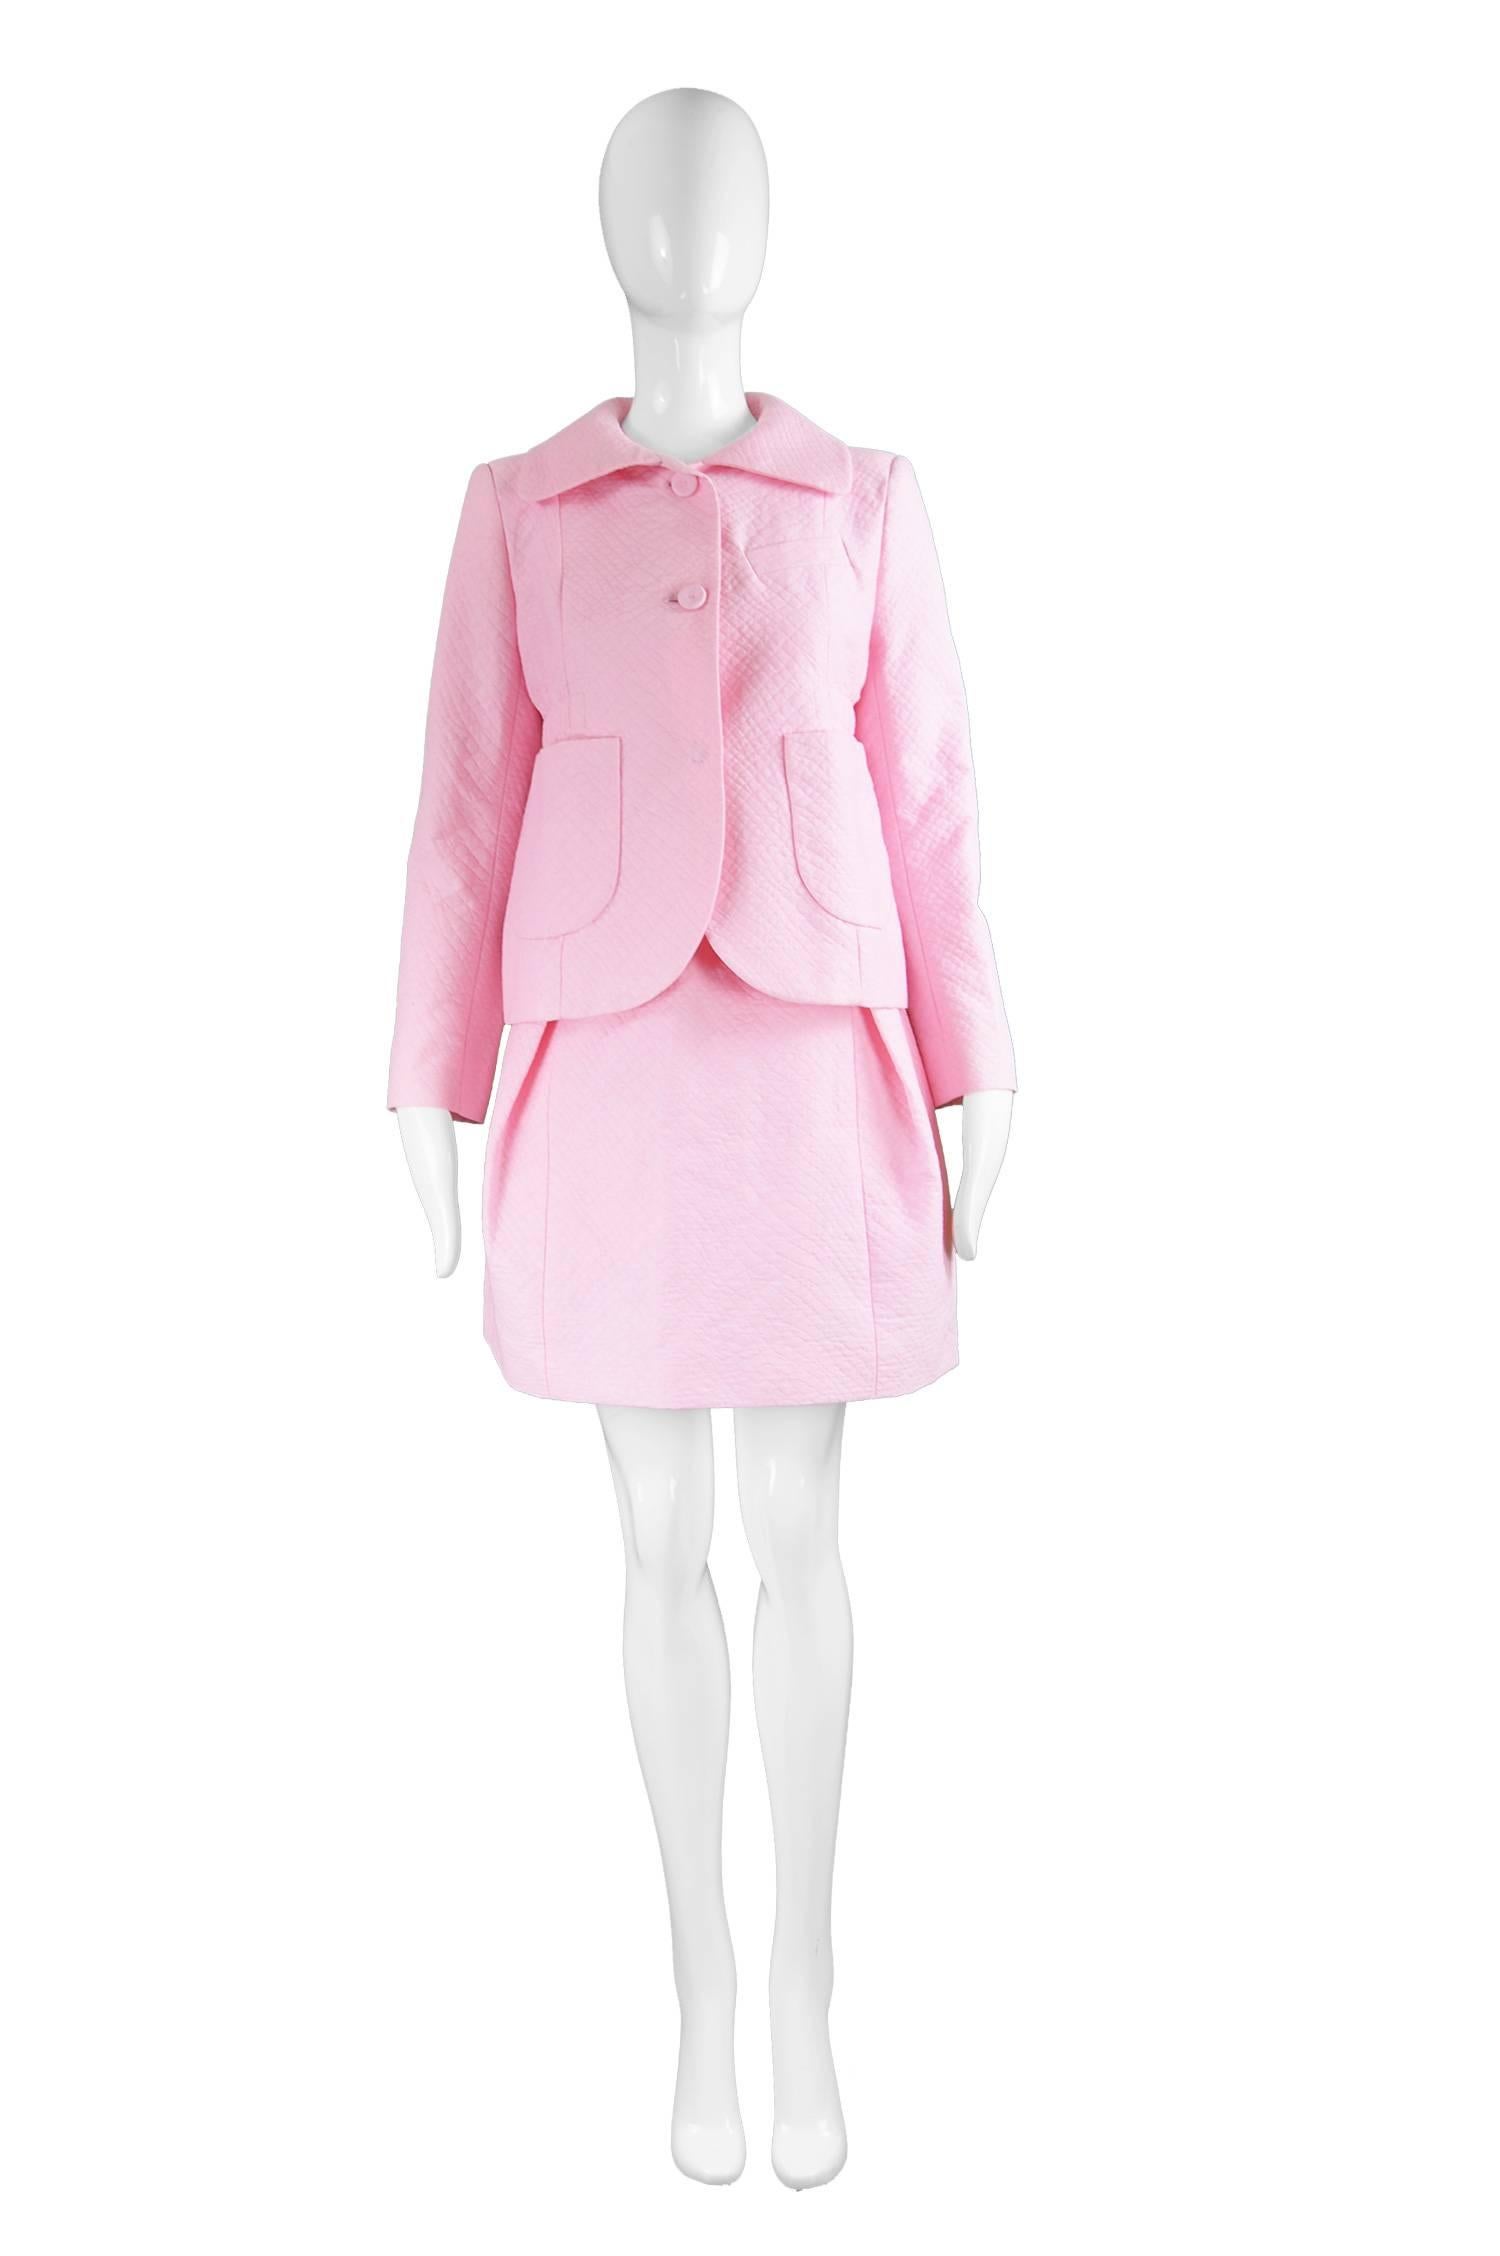 Carven Paris Baby Pink Quilted Cotton 2 Piece Jacket & Skirt Suit

Size: Marked 38 which is roughly a UK 10/ US 6. Please check measurements
Jacket
Bust - 36” / 91cm (please allow a couple of inches room for movement)
Length (Shoulder to Hem) -